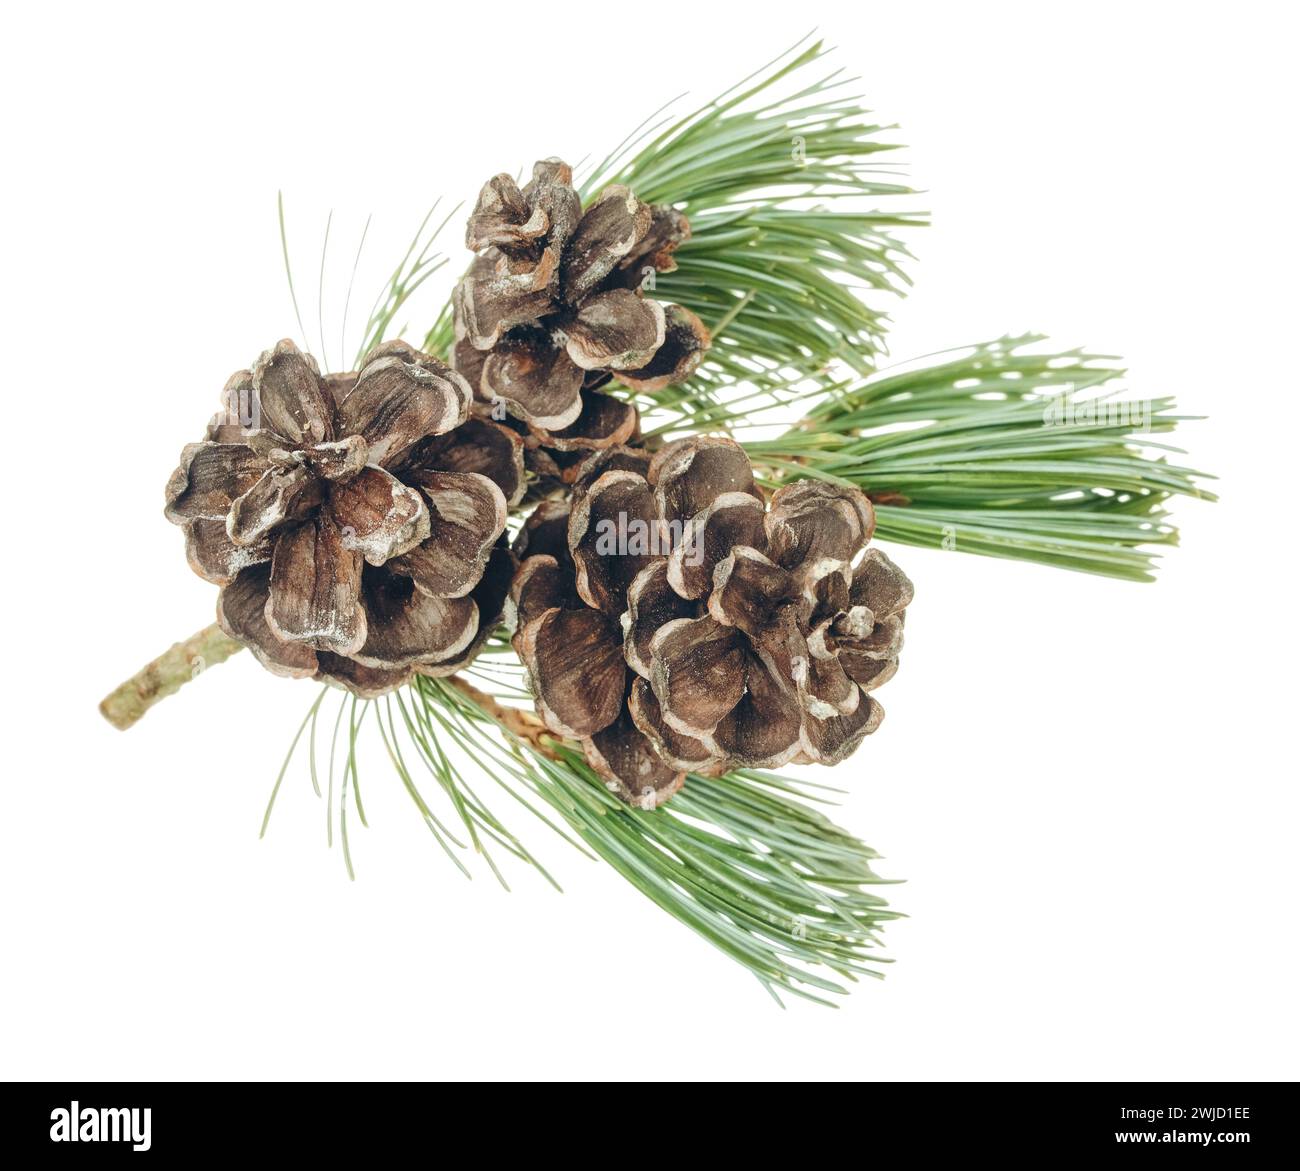 Spruce branch with fir cones. Christmas design element. For invitations, greeting cards, prints, packaging and more. Isolated. Winter. Holidays. Stock Photo